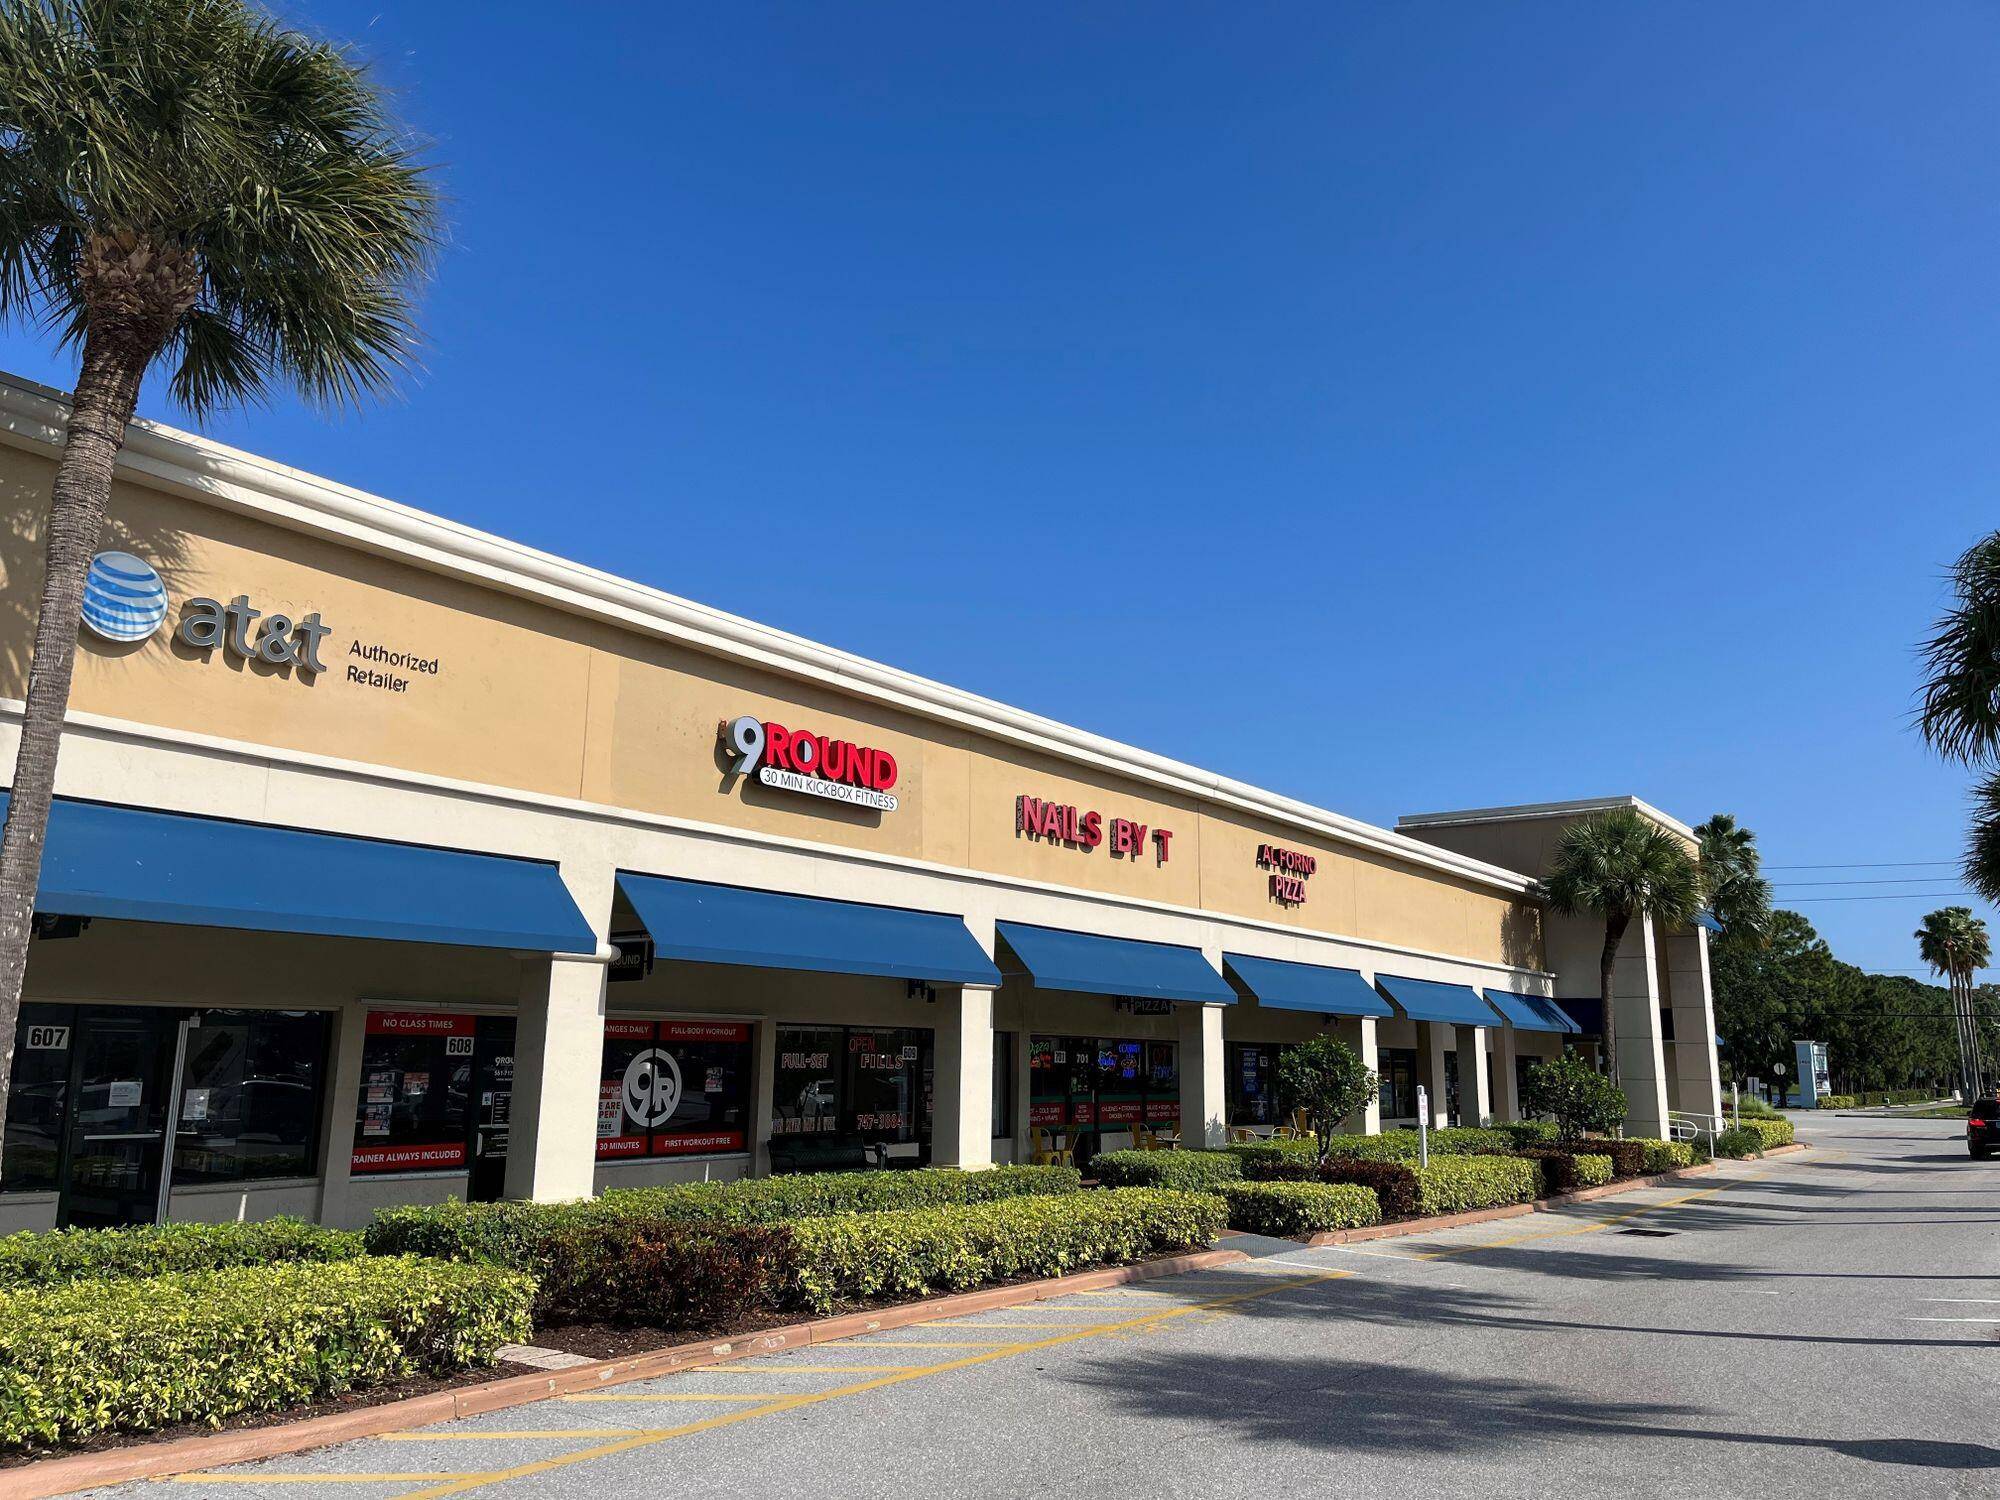 Unique opportunity to sub lease 1000 sq ft of retail space at the corner of Indiantown Rd Alt A1A, in one of Jupiters premier retail centers.